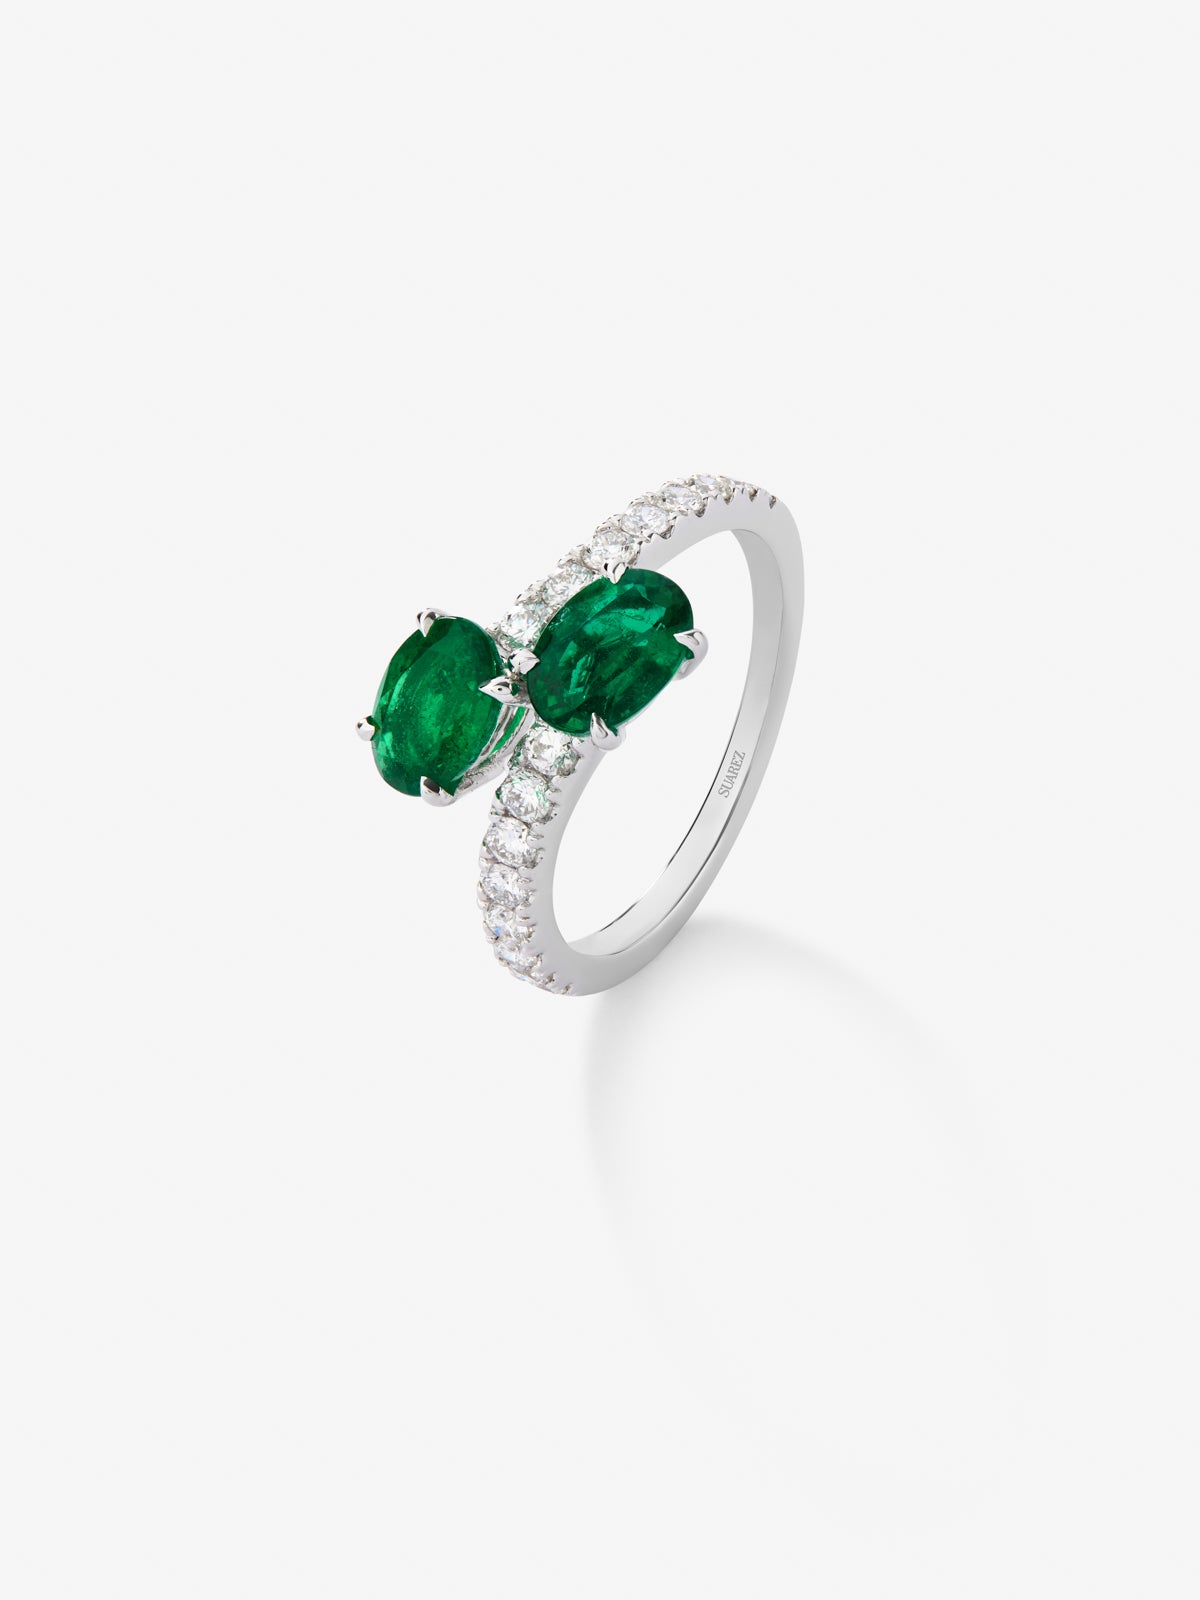 You and me ring in 18K white gold with 2 oval-cut green emeralds with a total of 1.46 cts and 16 brilliant-cut diamonds with a total of 0.45 cts